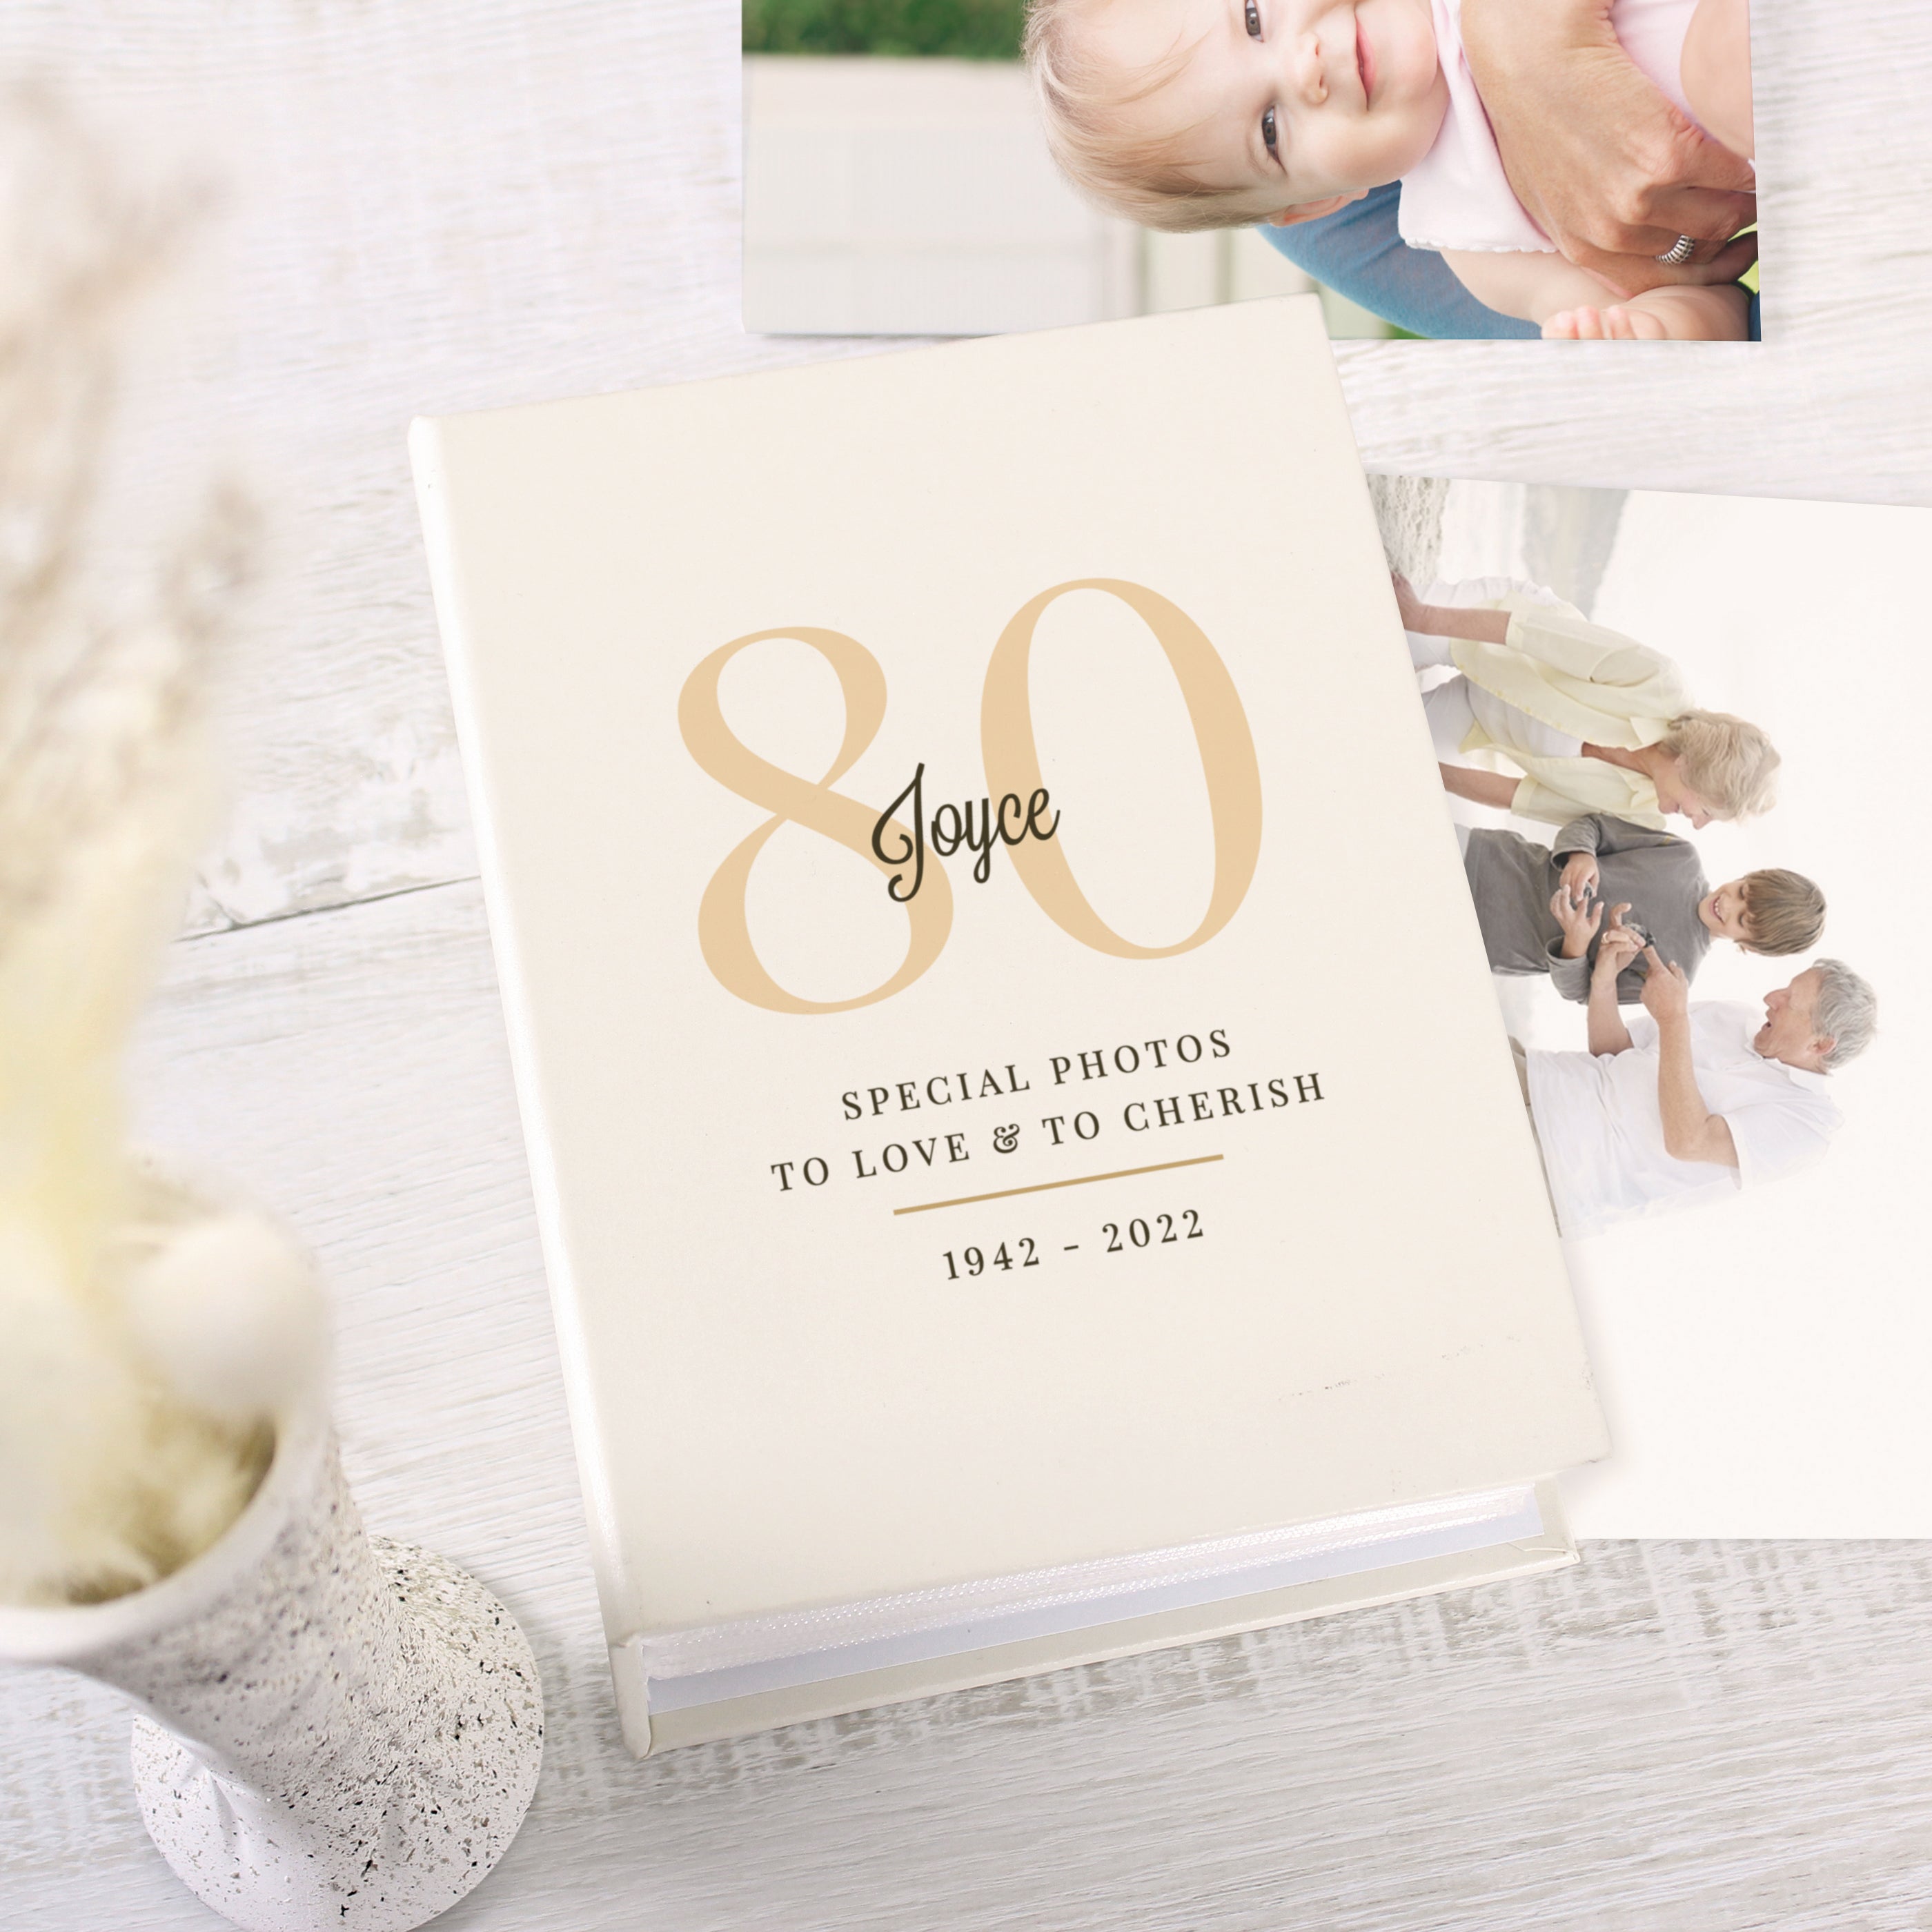 Personalised Big Birthday 6x4 Photo Album with Sleeves Image shows Extra Photos in the Life style Photo